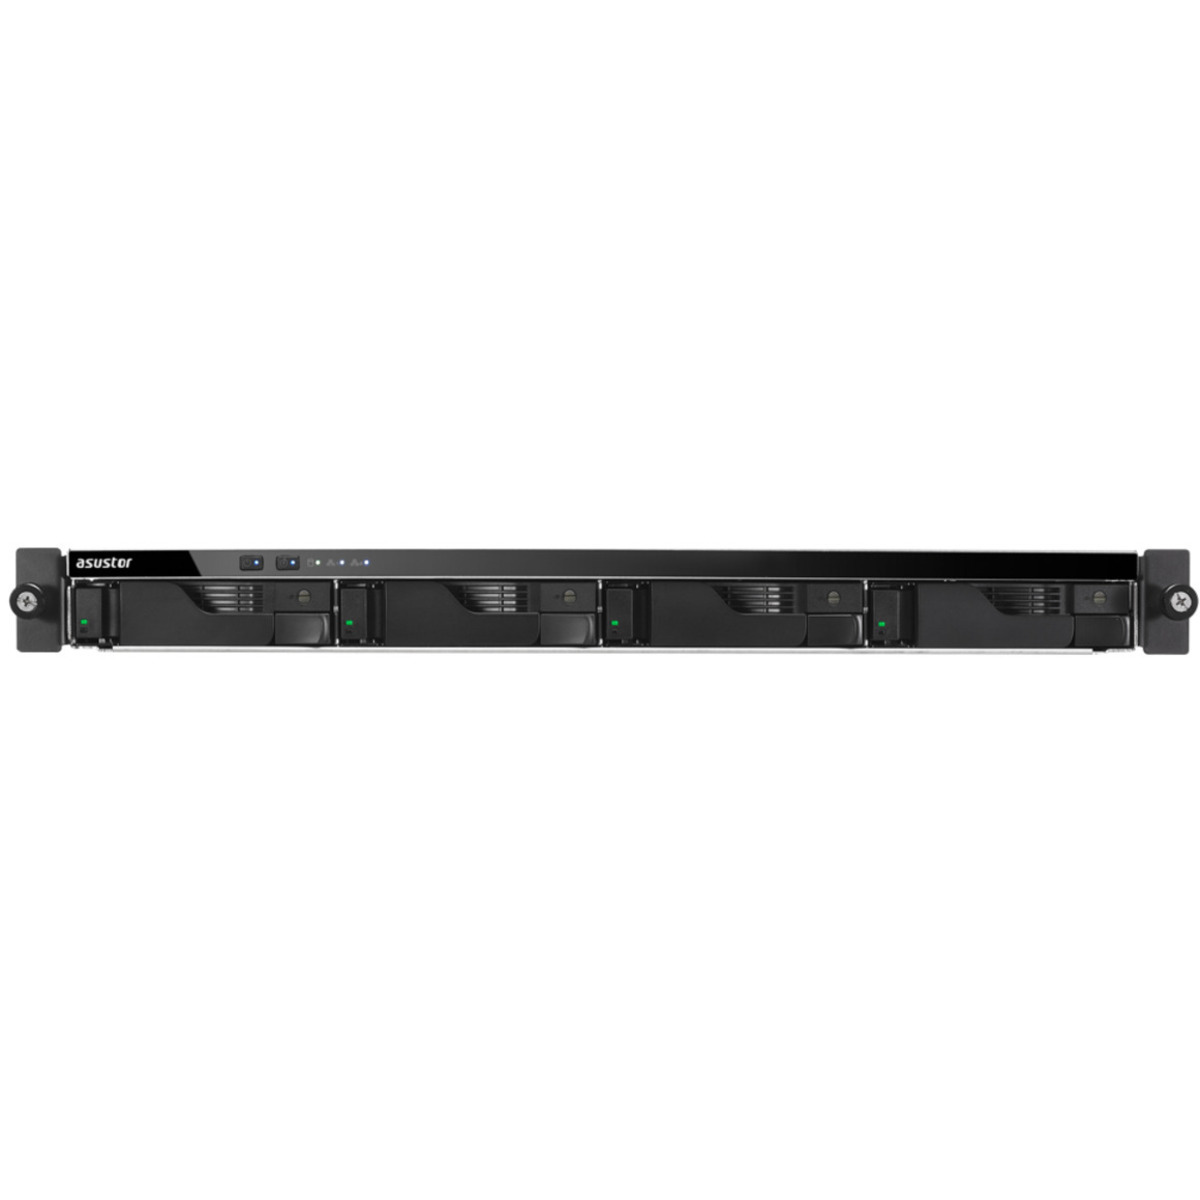 buy ASUSTOR LOCKERSTOR 4RS AS6504RS 96tb RackMount NAS - Network Attached Storage Device 4x24000gb Western Digital Ultrastar HC580 WUH722424ALE6L4 3.5 7200rpm SATA 6Gb/s HDD ENTERPRISE Class Drives Installed - Burn-In Tested - FREE RAM UPGRADE - nas headquarters buy network attached storage server device das new raid-5 free shipping simply usa LOCKERSTOR 4RS AS6504RS